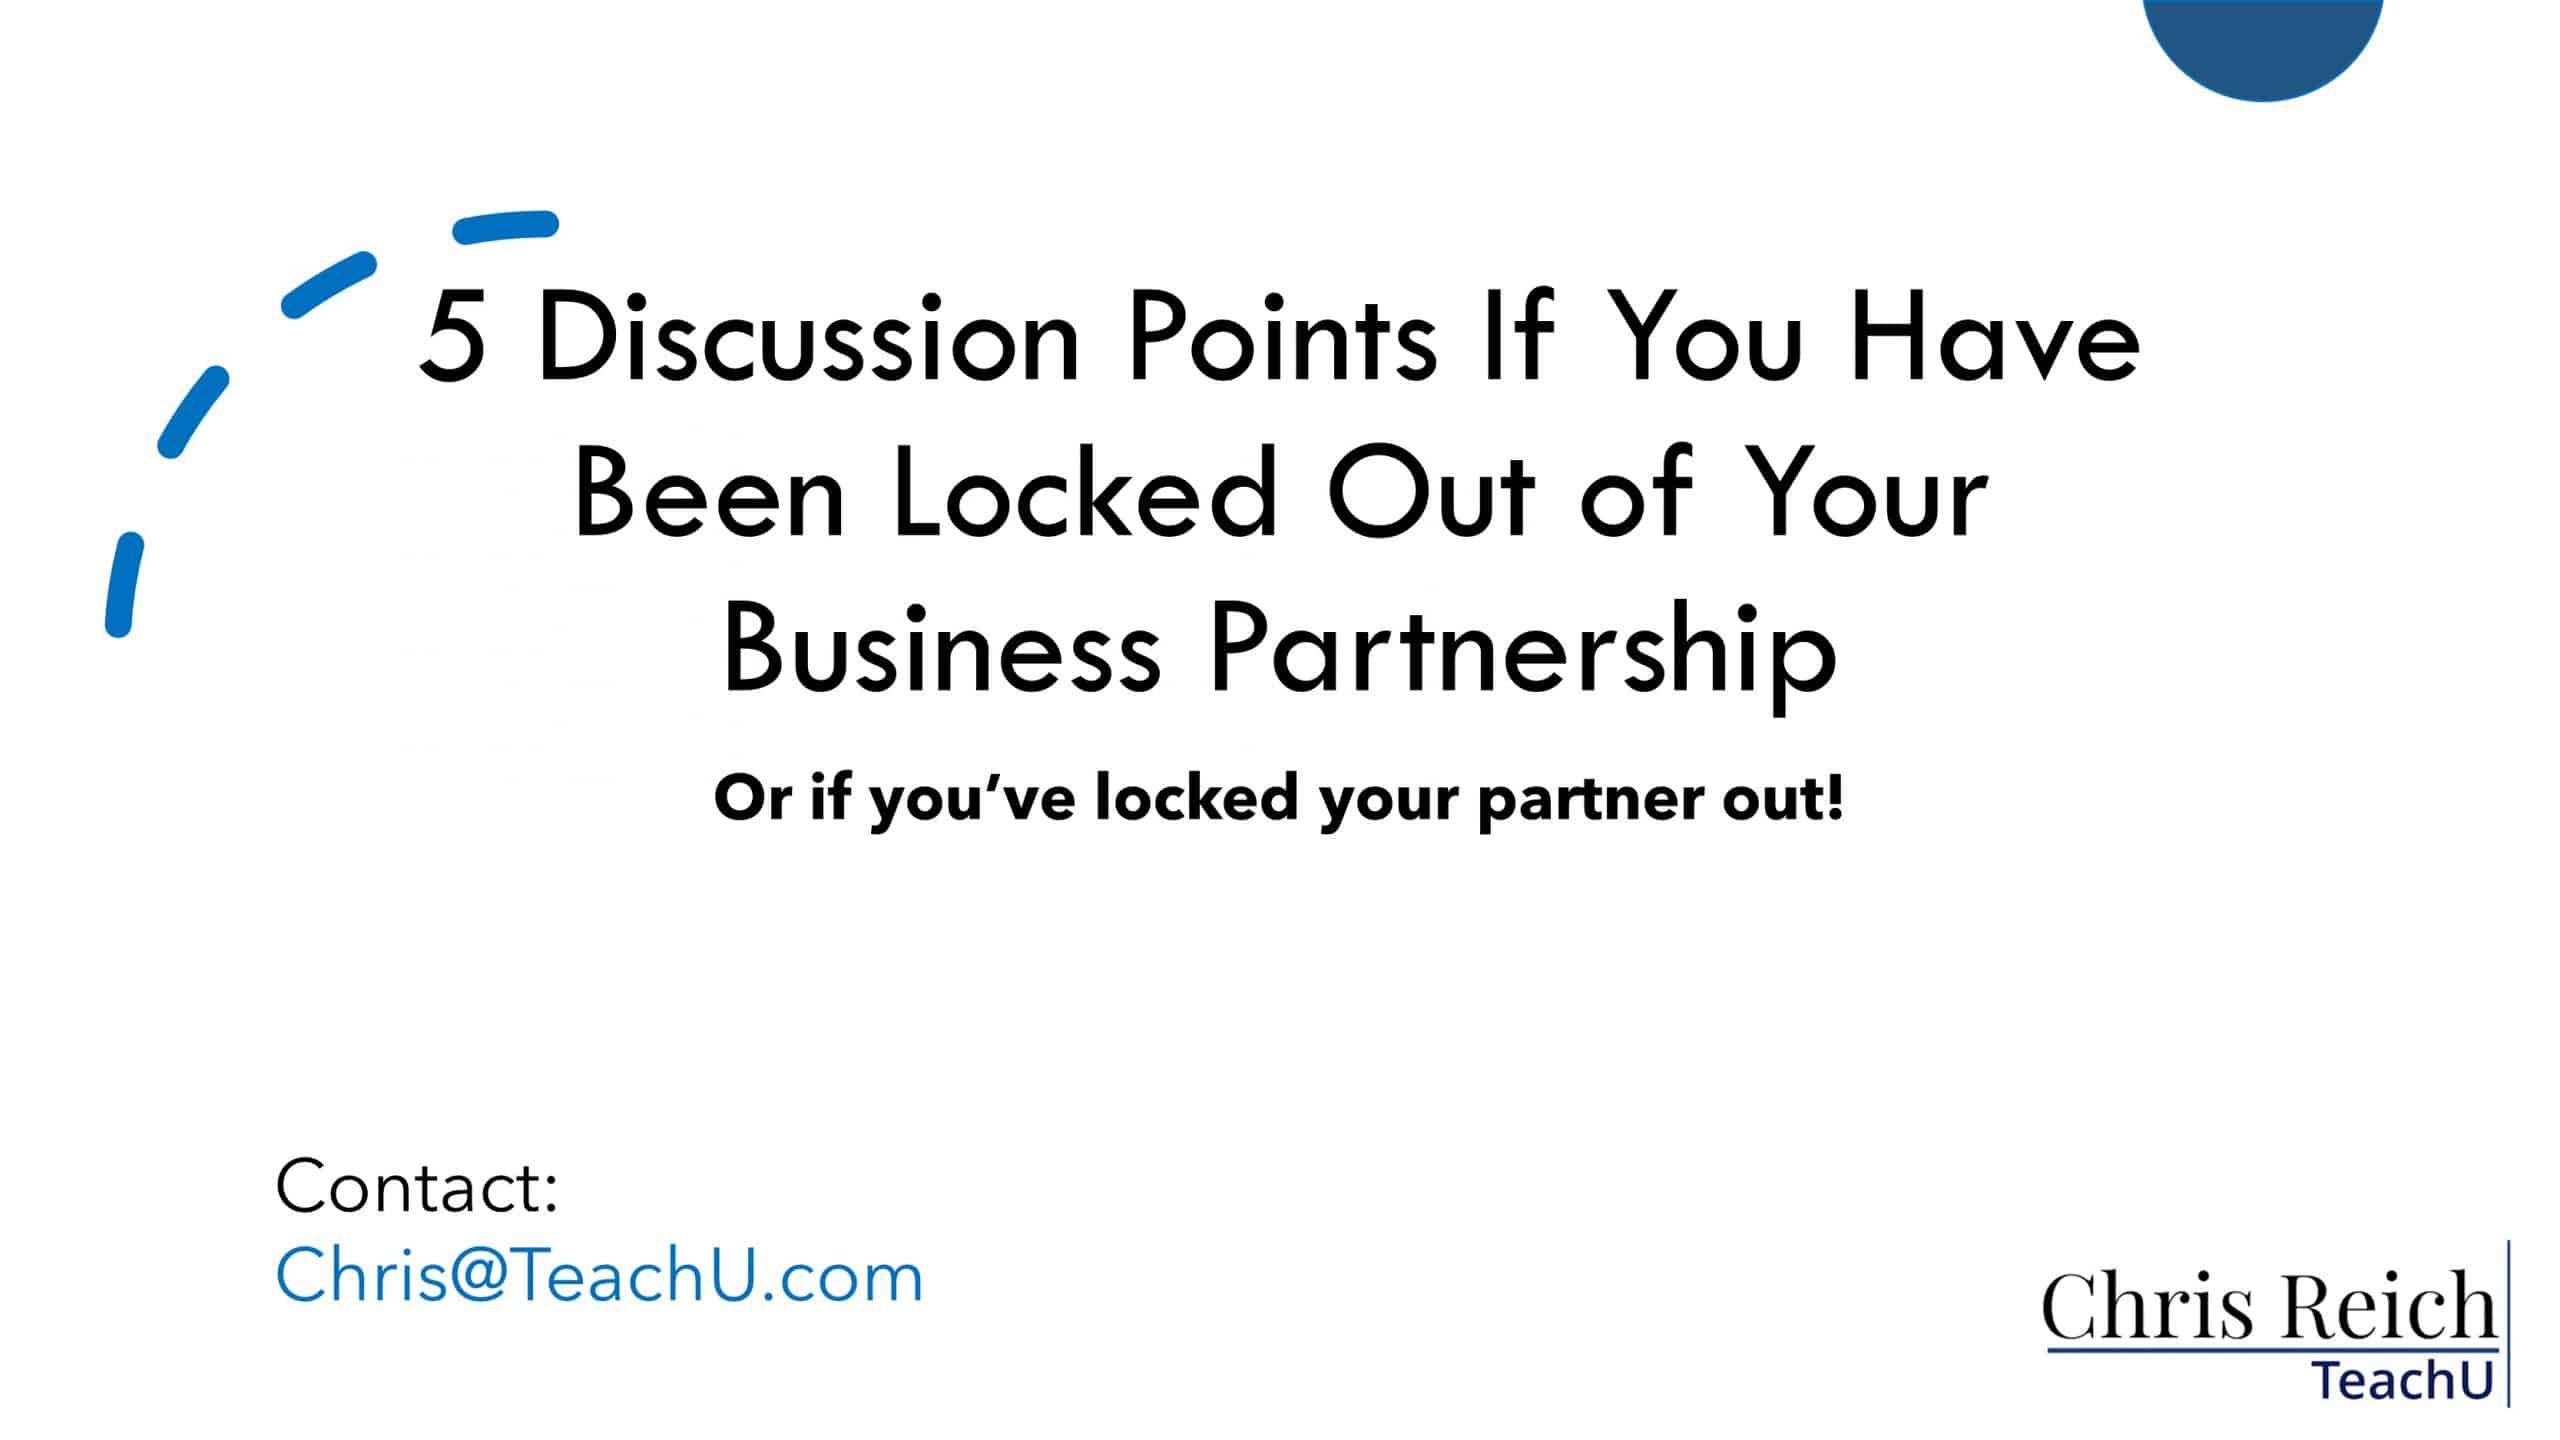 5 Points to Consider When a Partner Is Locked Out Of the Business